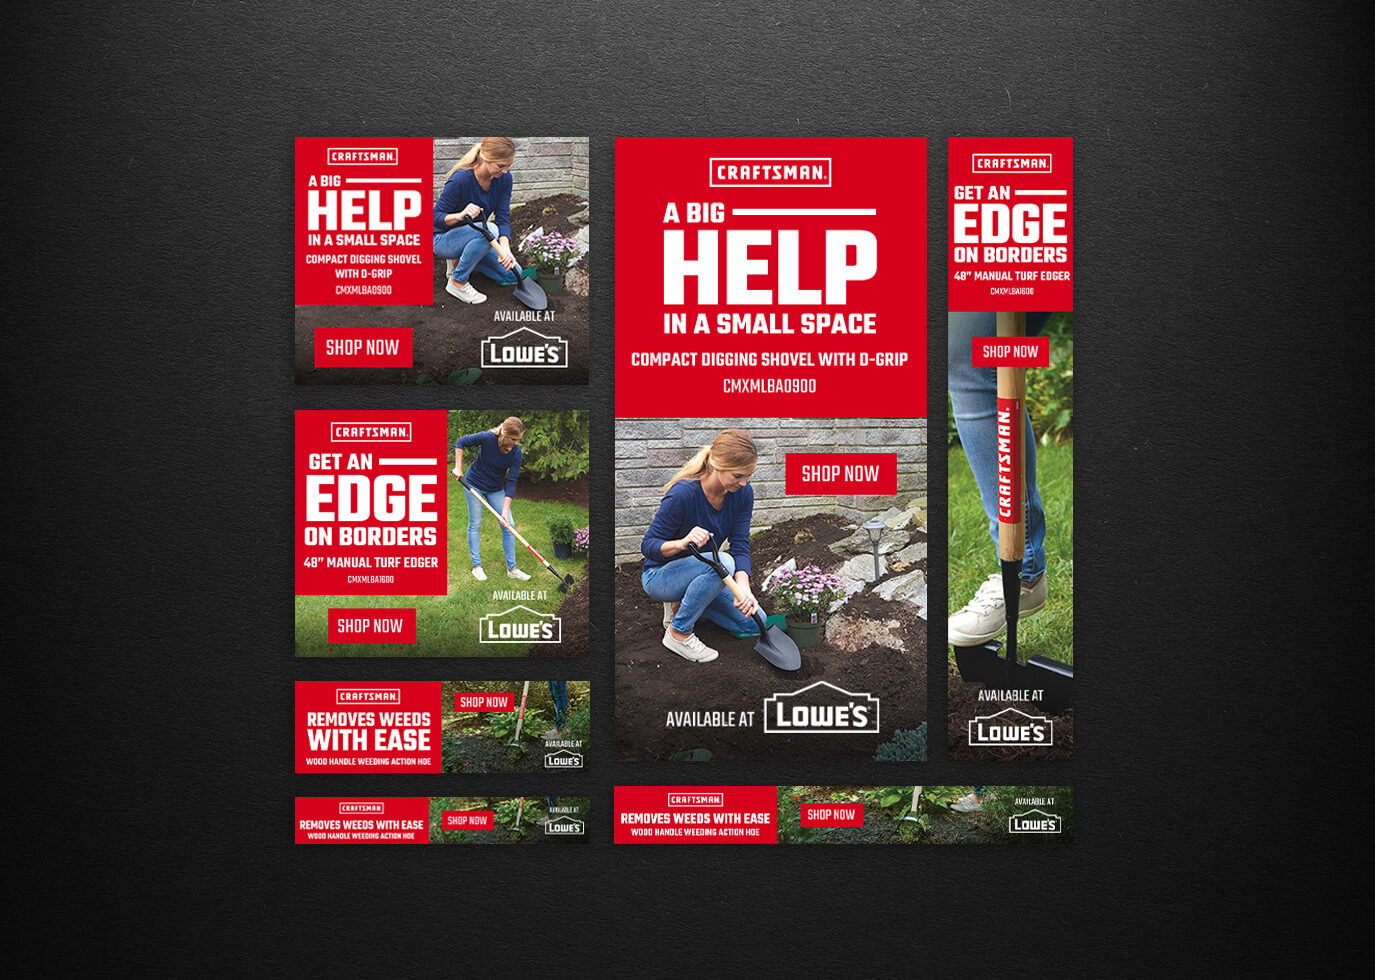 Lowes Campaign featuring Craftsman